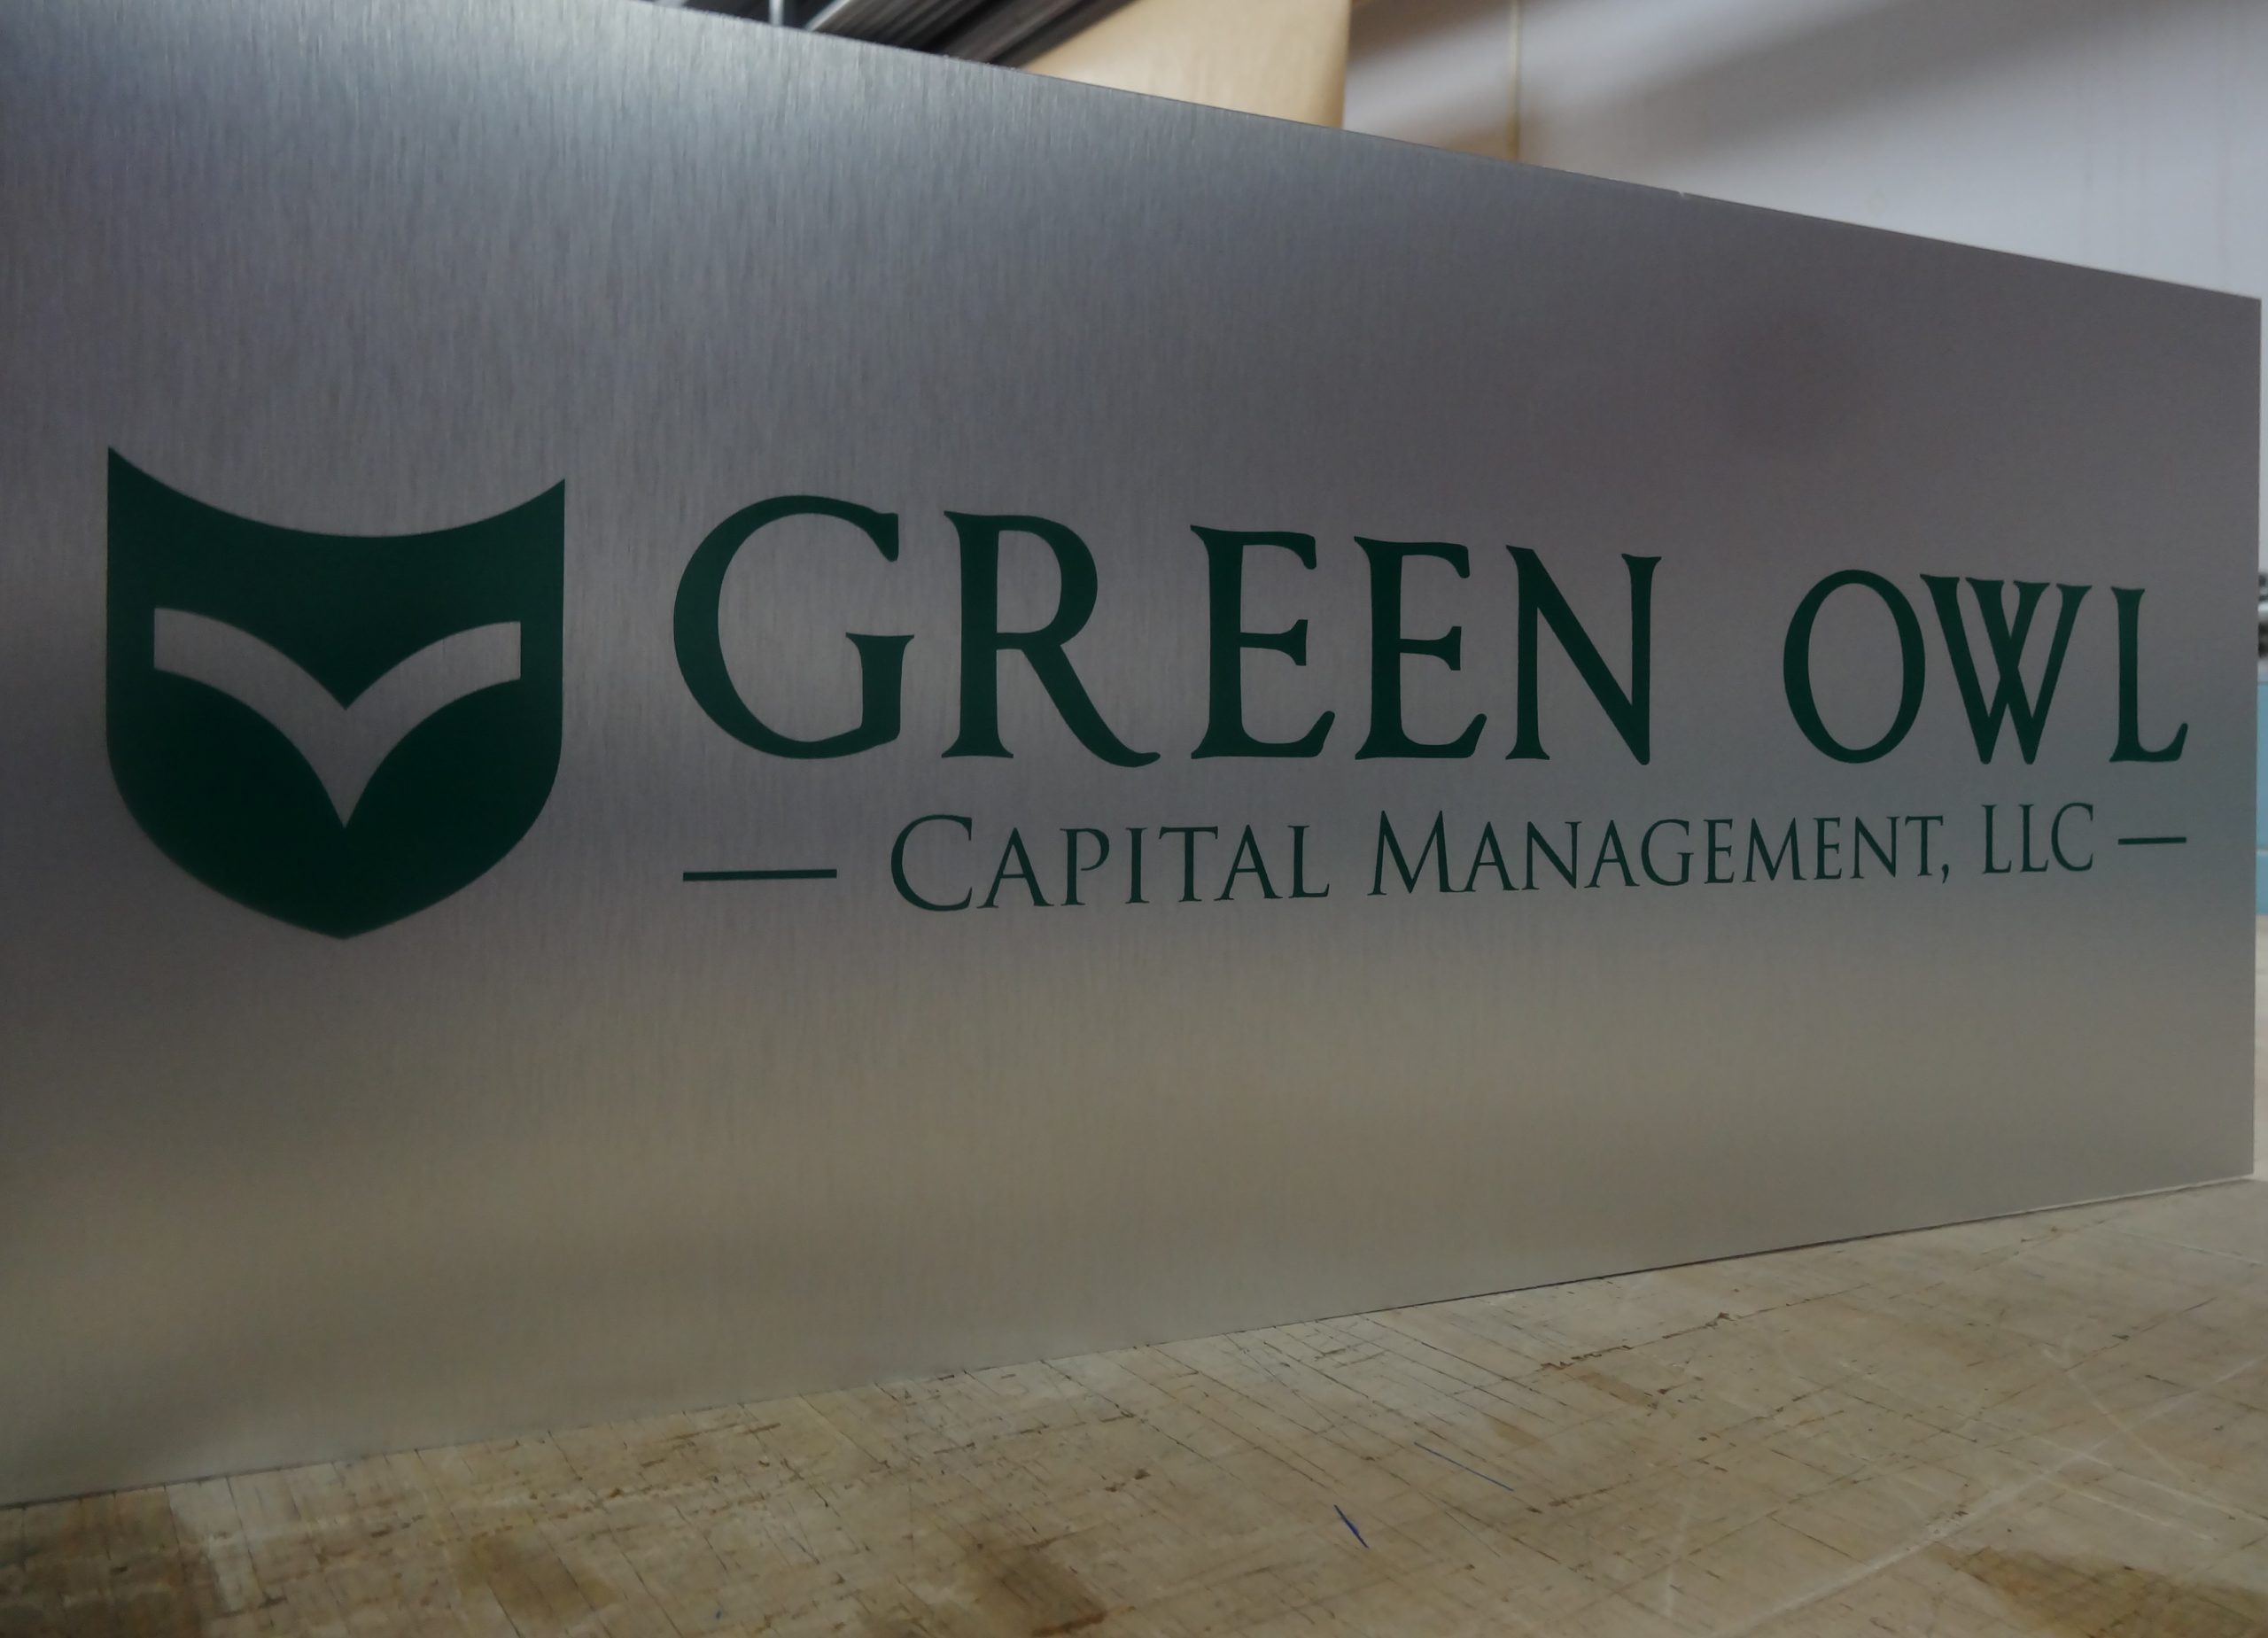 green owl rigid signs for events and businesses